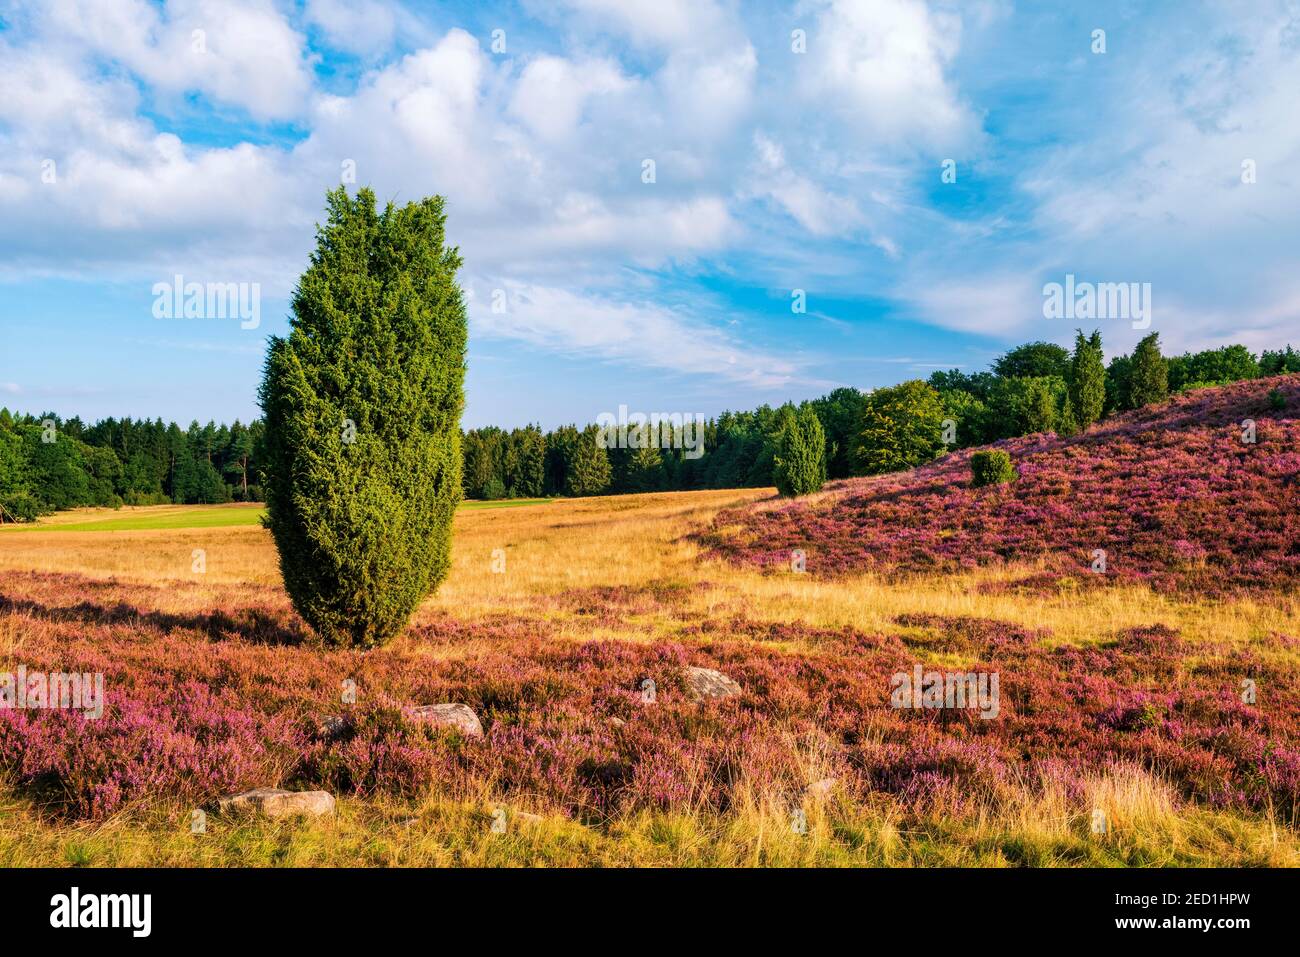 Typical heath landscape at Wilseder Berg with flowering heather and juniper bush, Lueneburger Heide, Lower Saxony, Germany Stock Photo